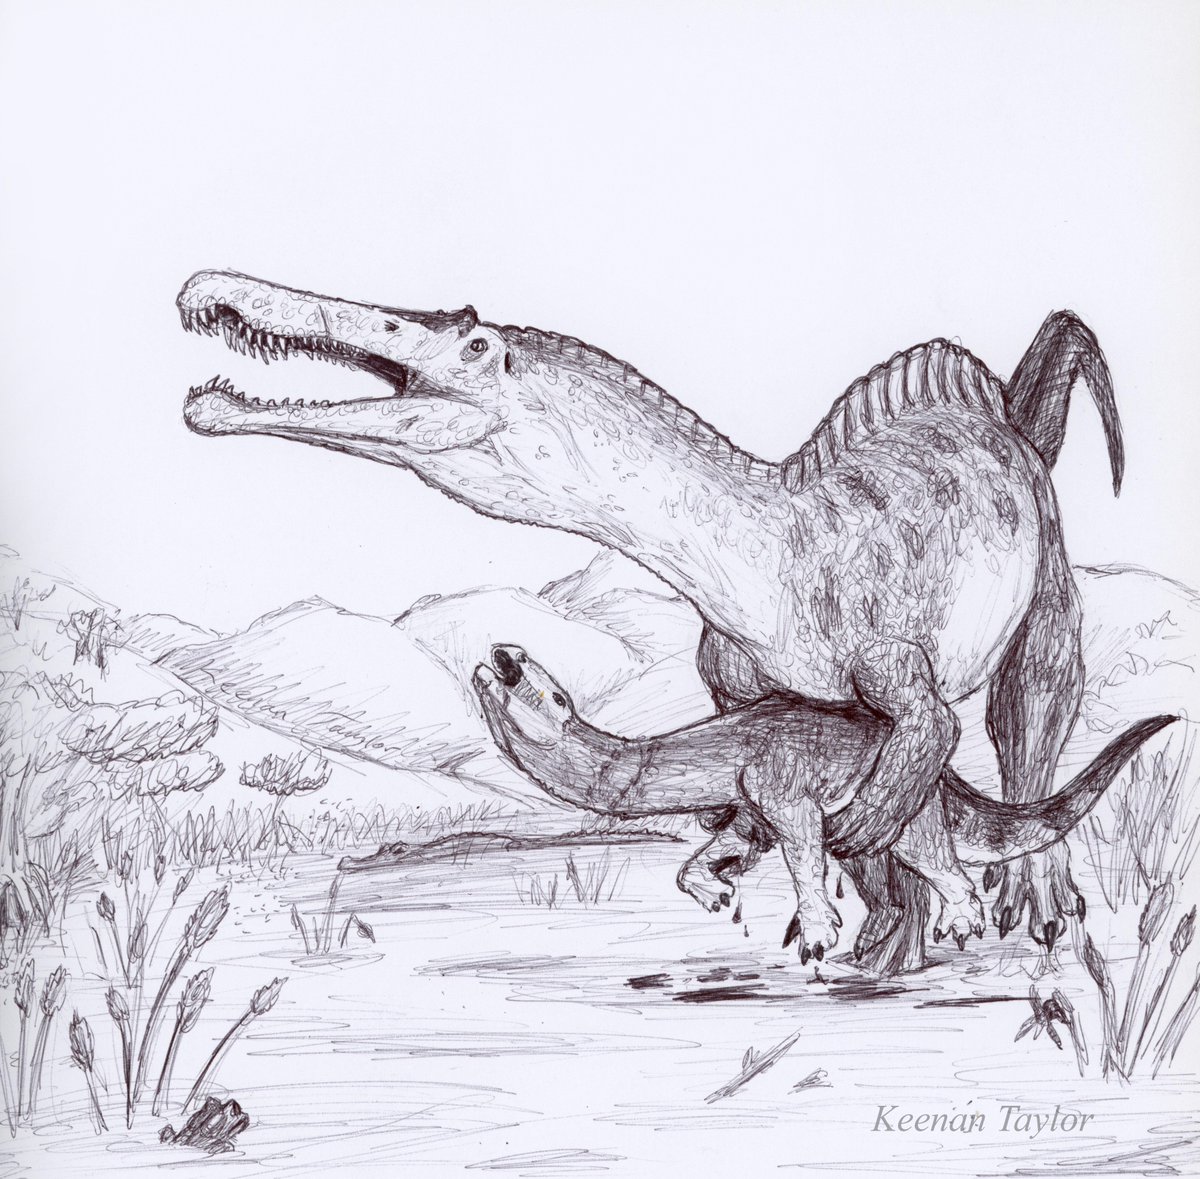 An update on my #Suchomimus and #Lurdusaurus sketch, this time with a scann...